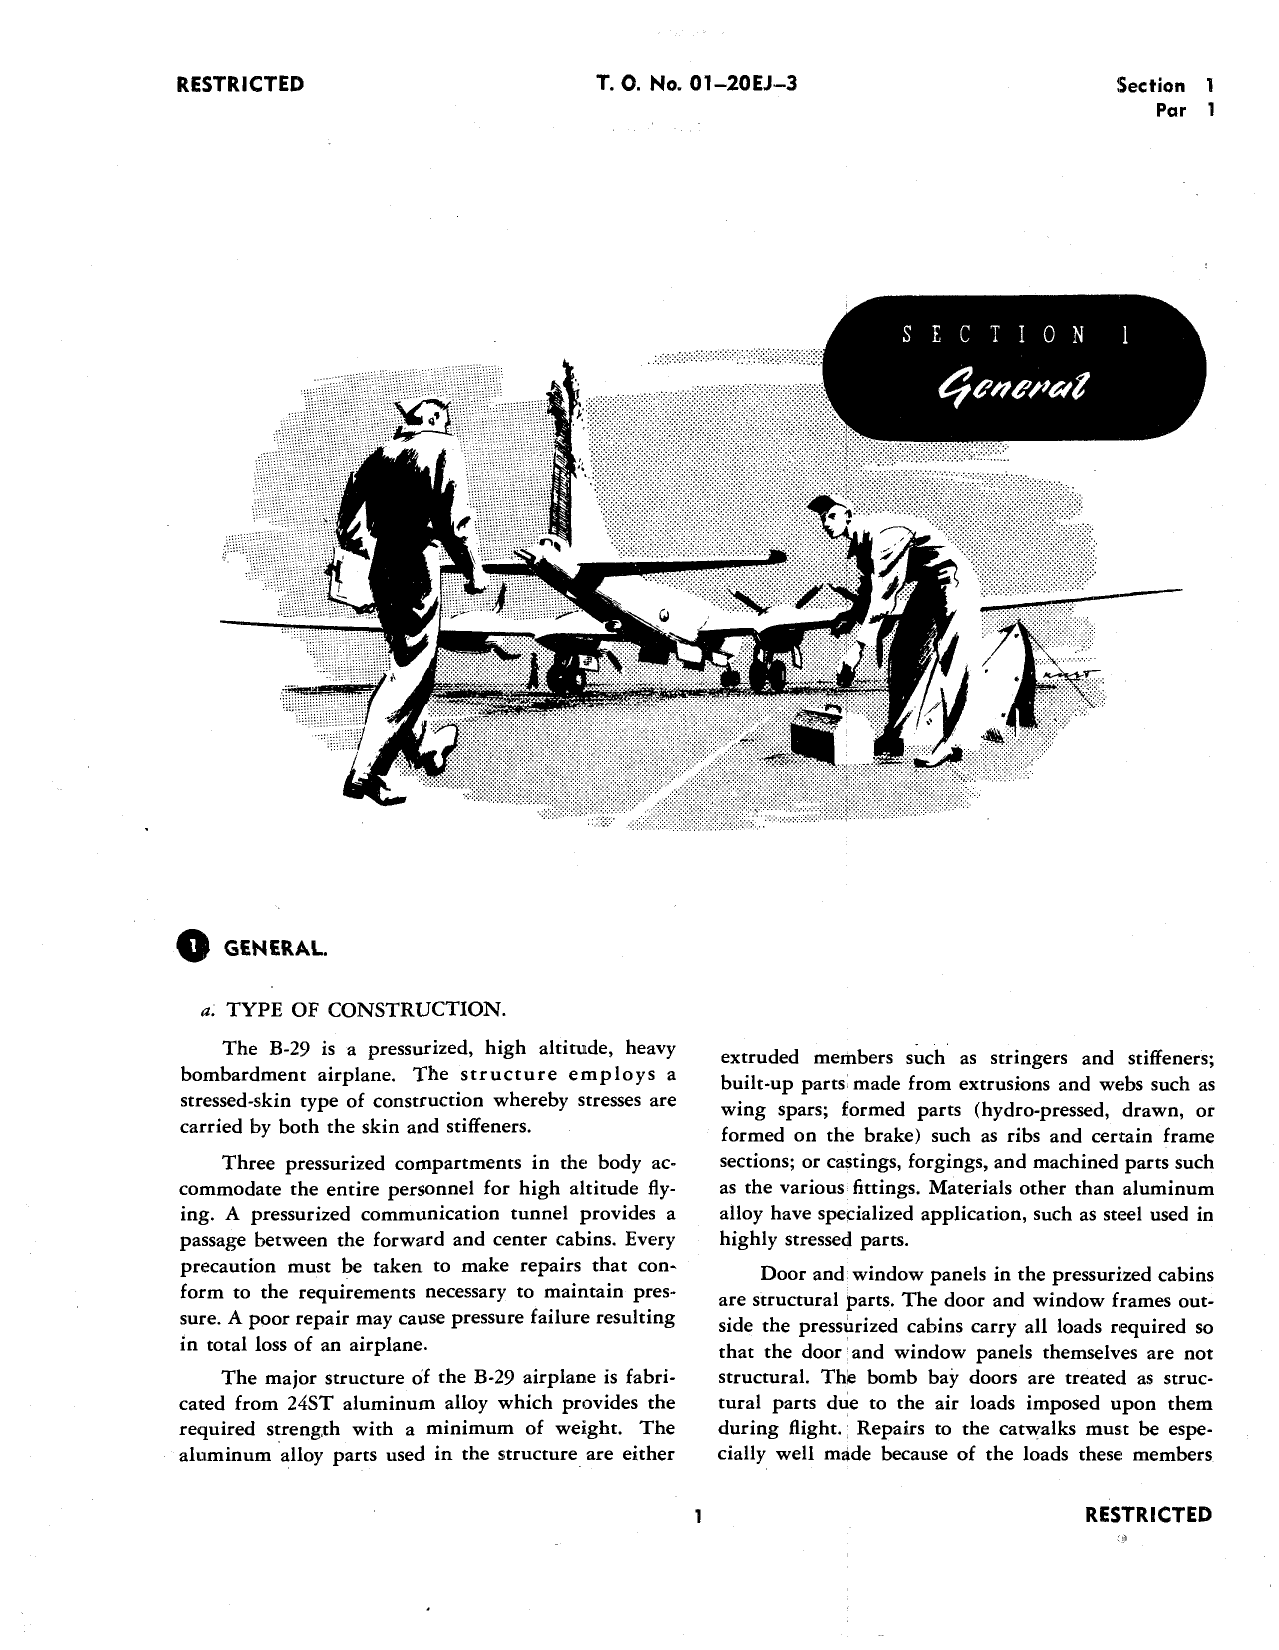 Sample page 21 from AirCorps Library document: Structural Repair Instructions for Army Model B-29 Airplane